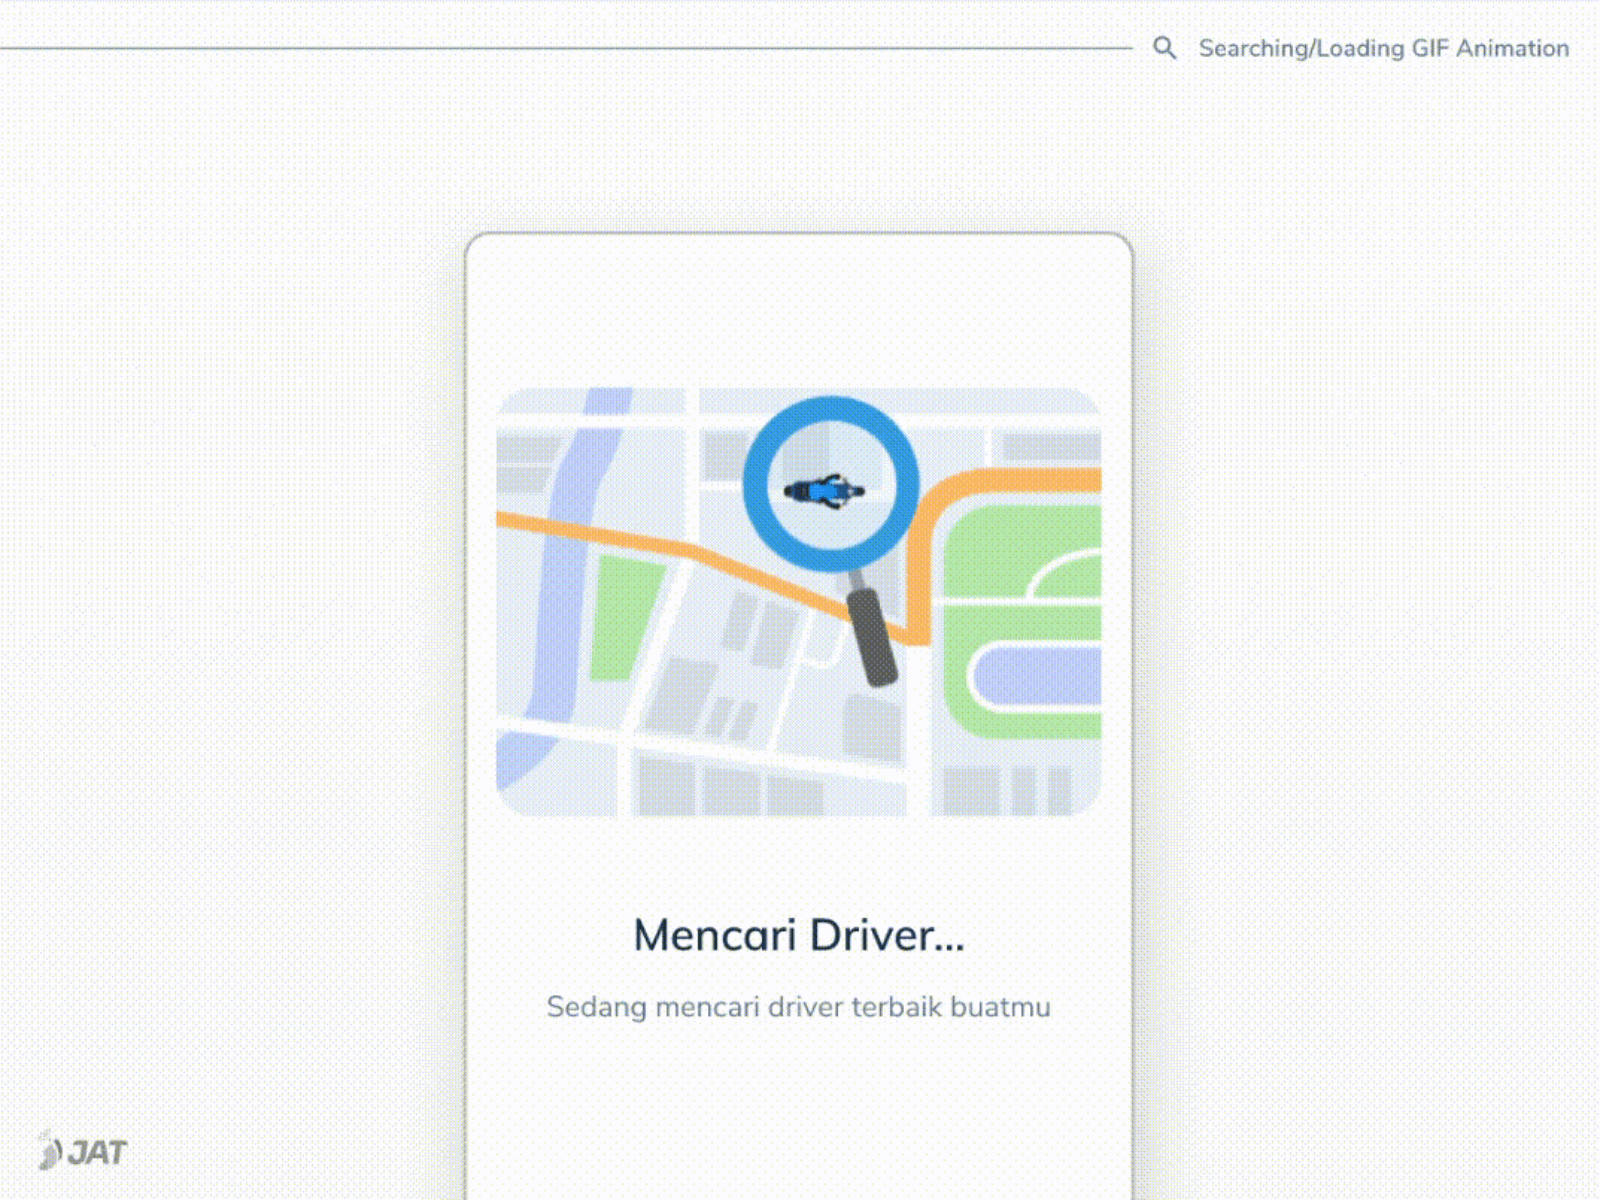 JAT Searching for Driver Animation animation design illustration ui ux